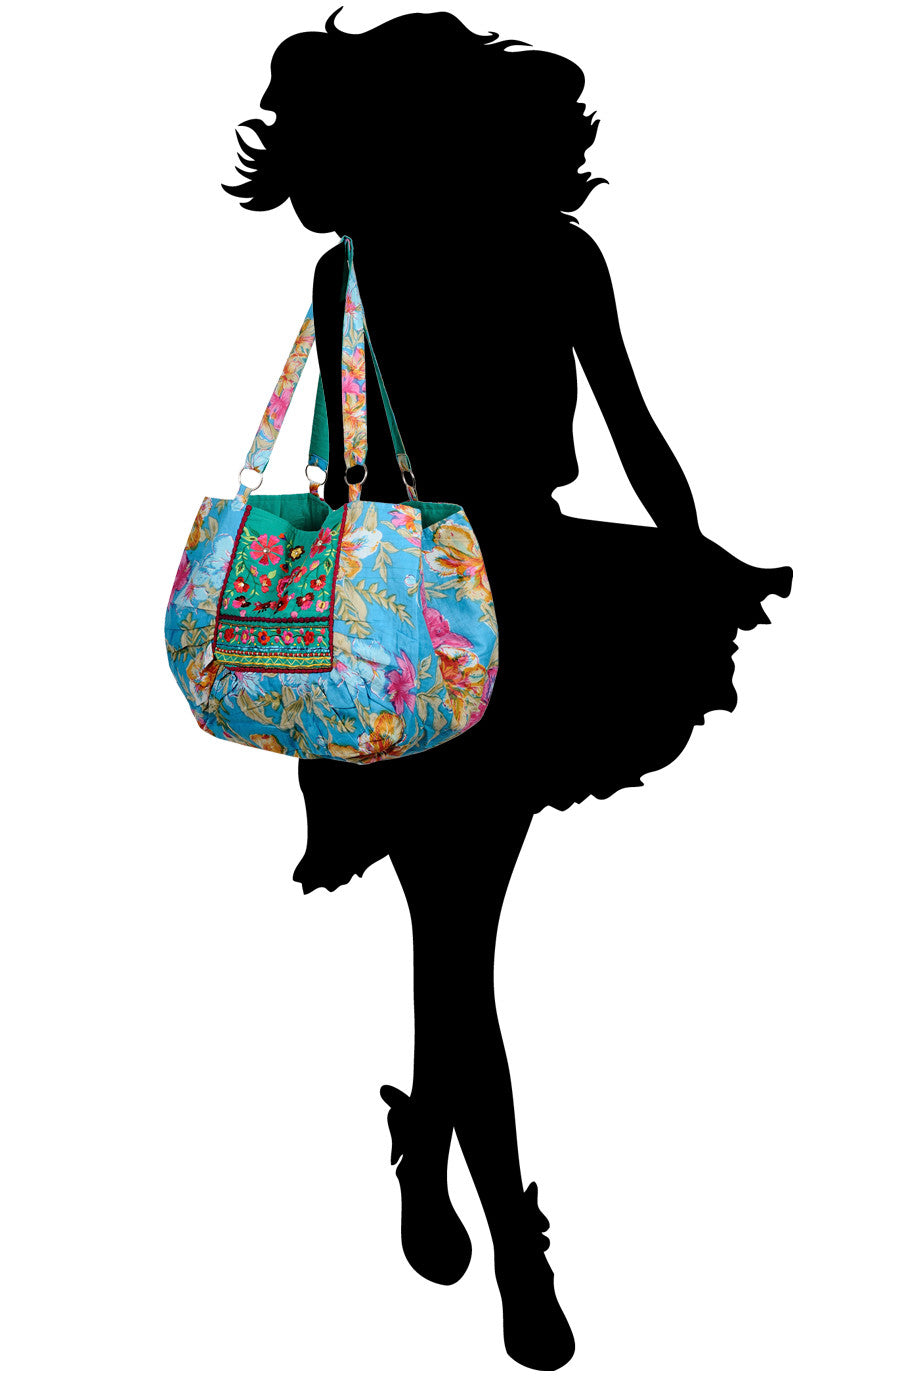 MANOUCHE Blue Bag with Flowers